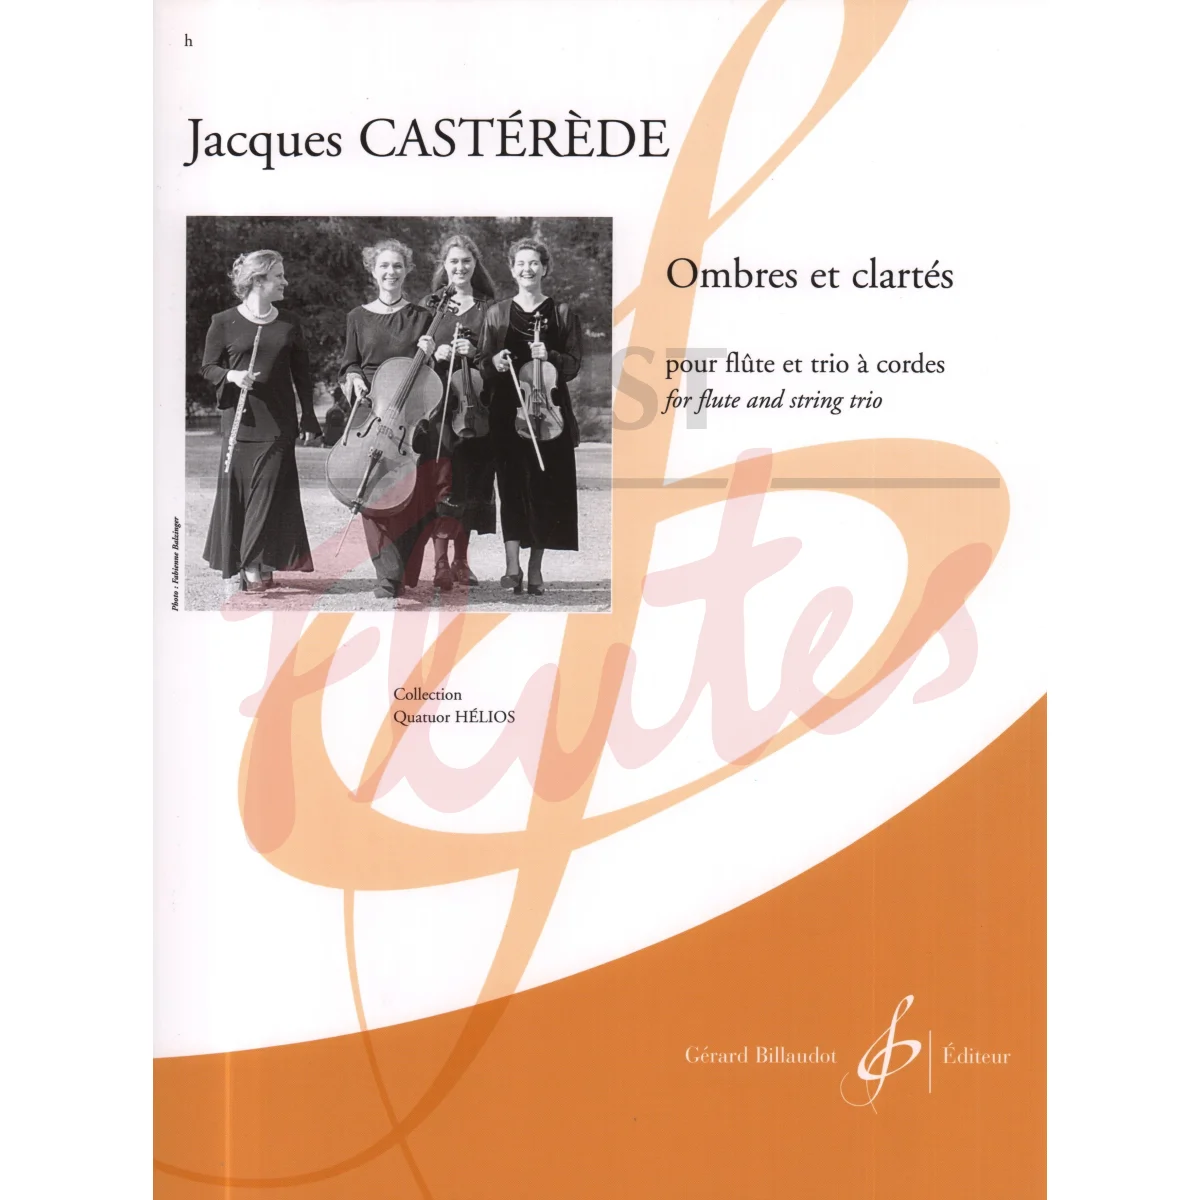 Ombres et clartés for Flute and String Trio